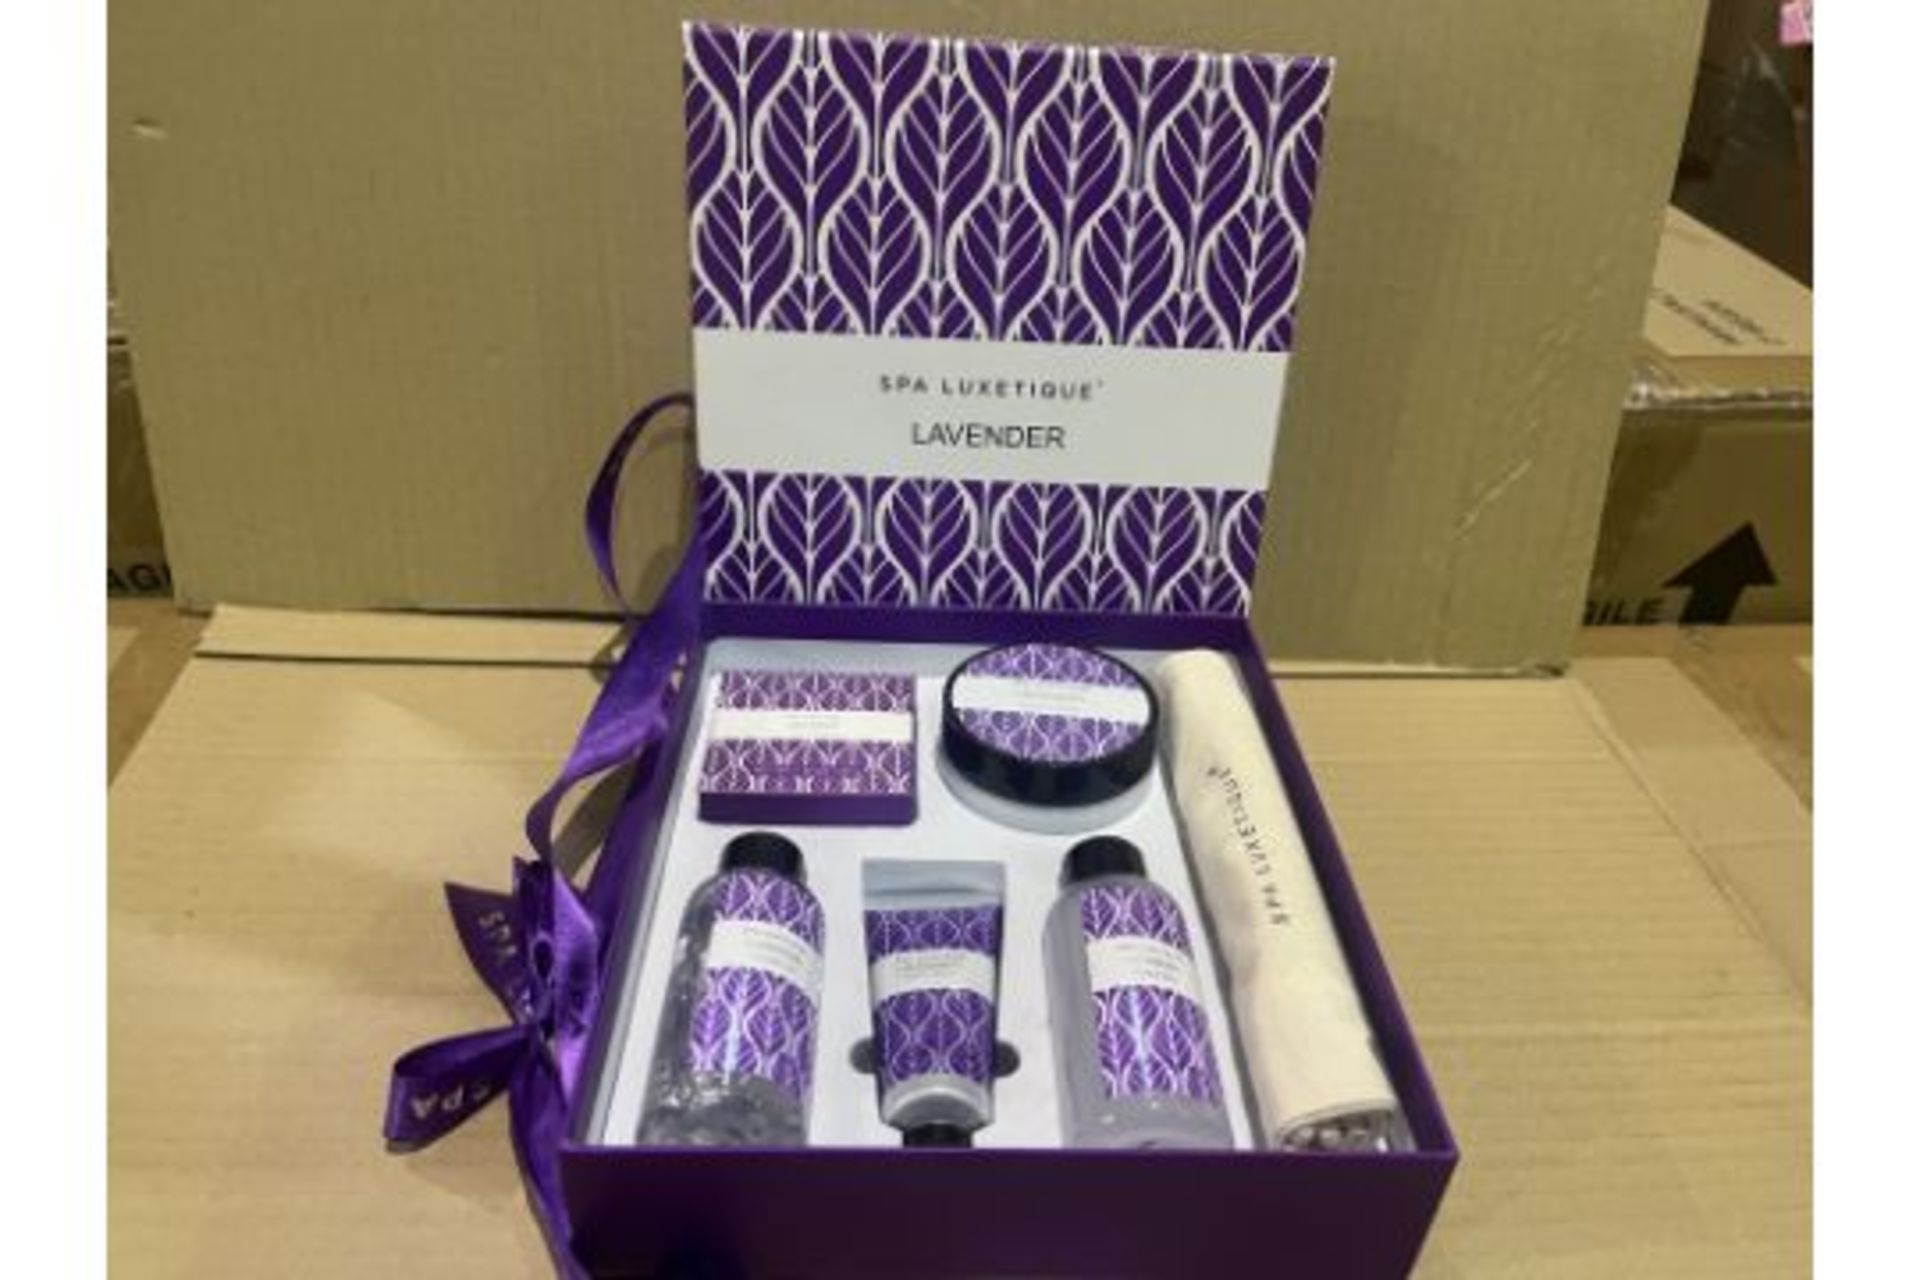 12 X BRAND NEW SPA LUXETIQUE 6 PIECE LAVENDER GIFT SETS R13